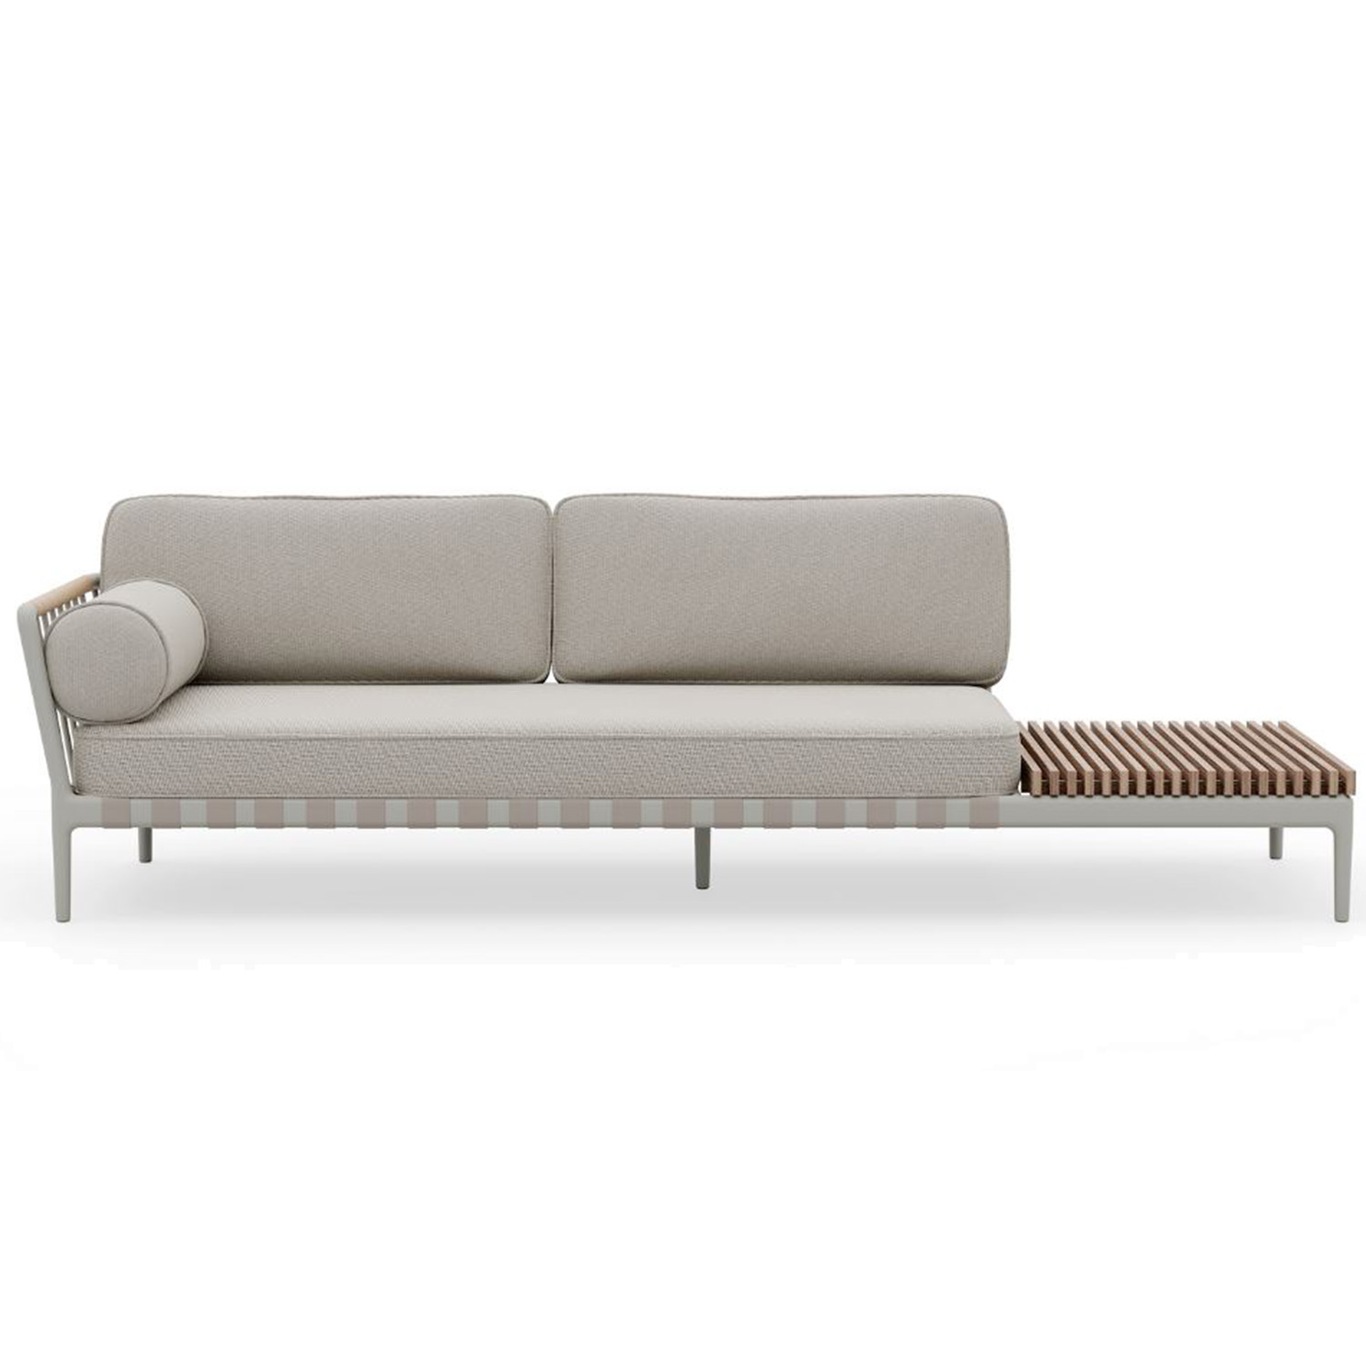 Vipp720 Open-Air Sofa Open End Right, Beige